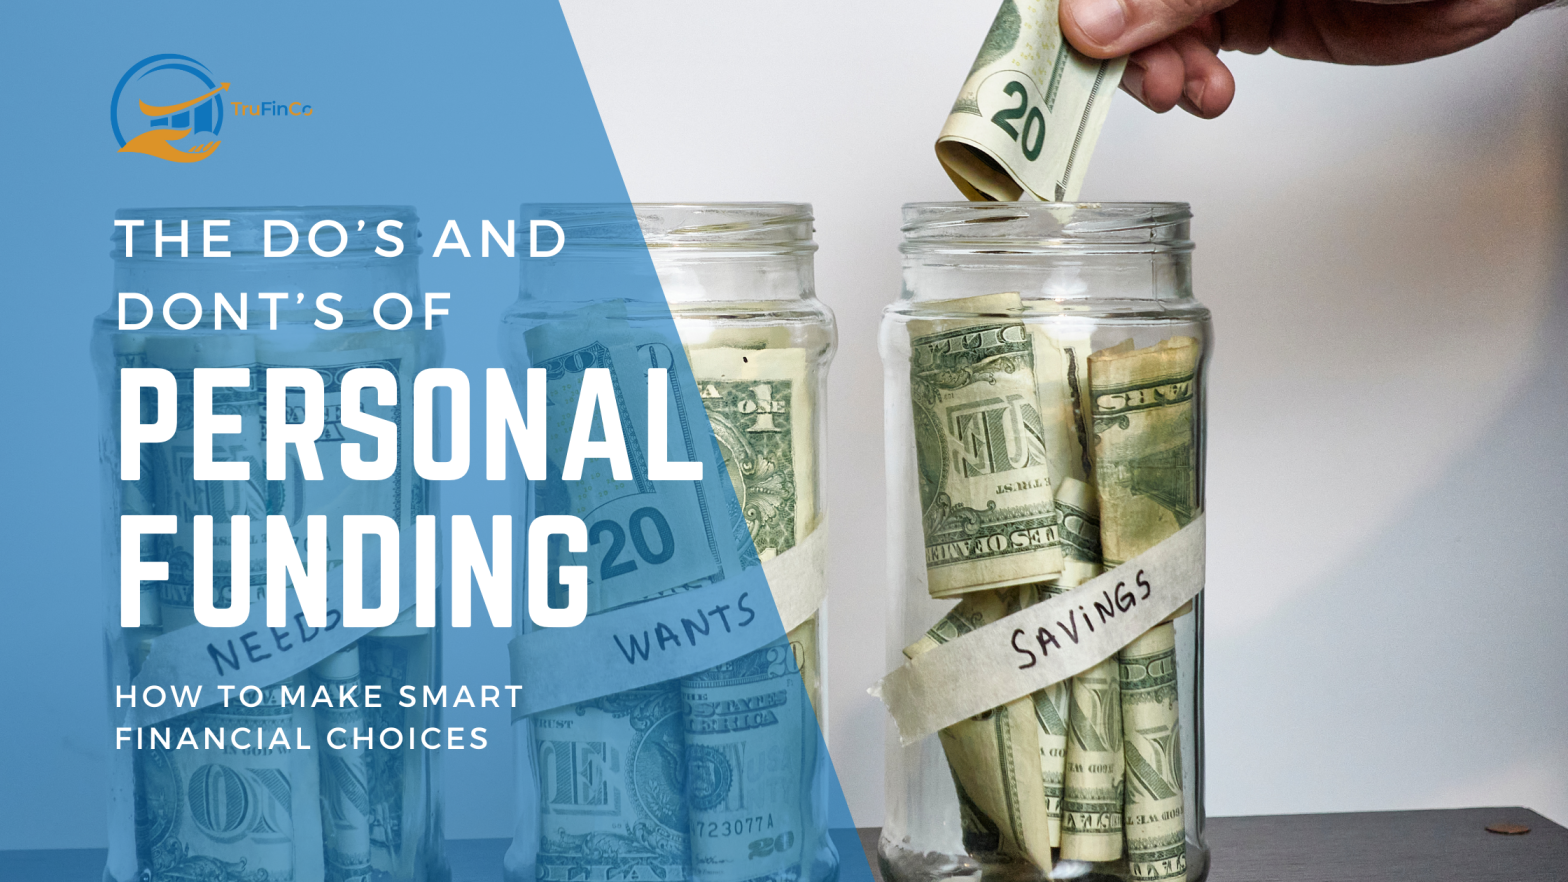 The Do’s and Don’ts of Personal Funding: How to Make Smart Financial Choices